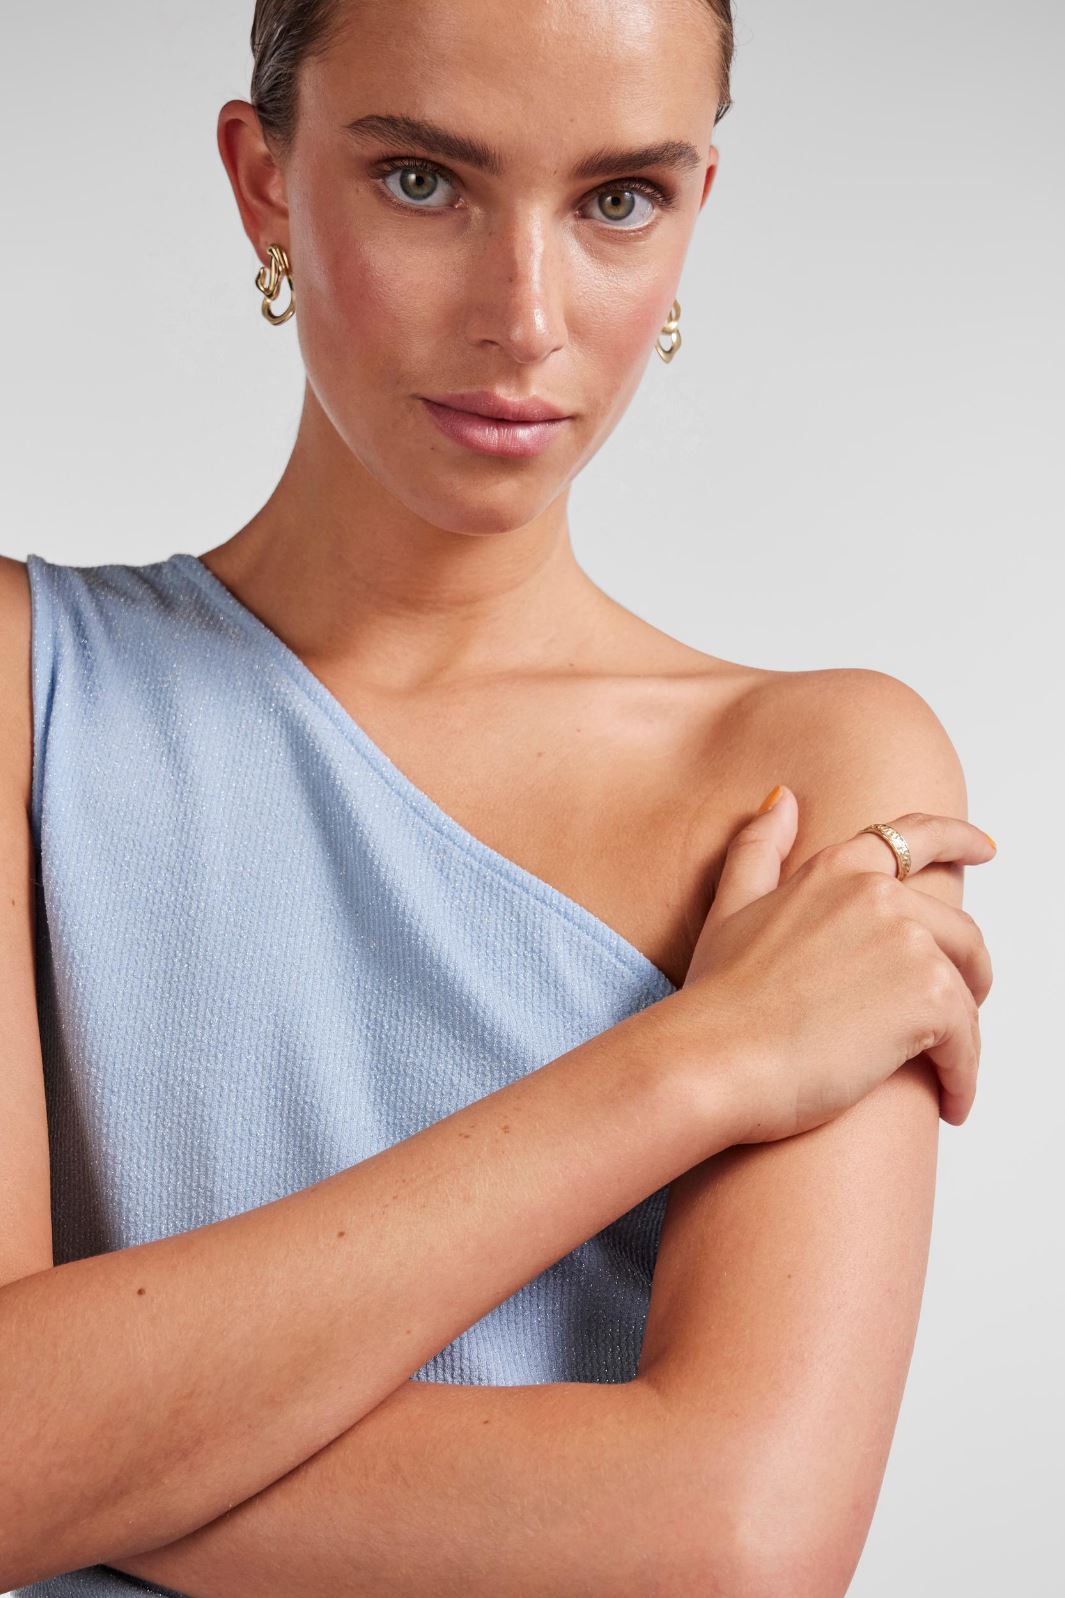 Pieces - Pclina One Shoulder Top - Airy Blue Toppe 